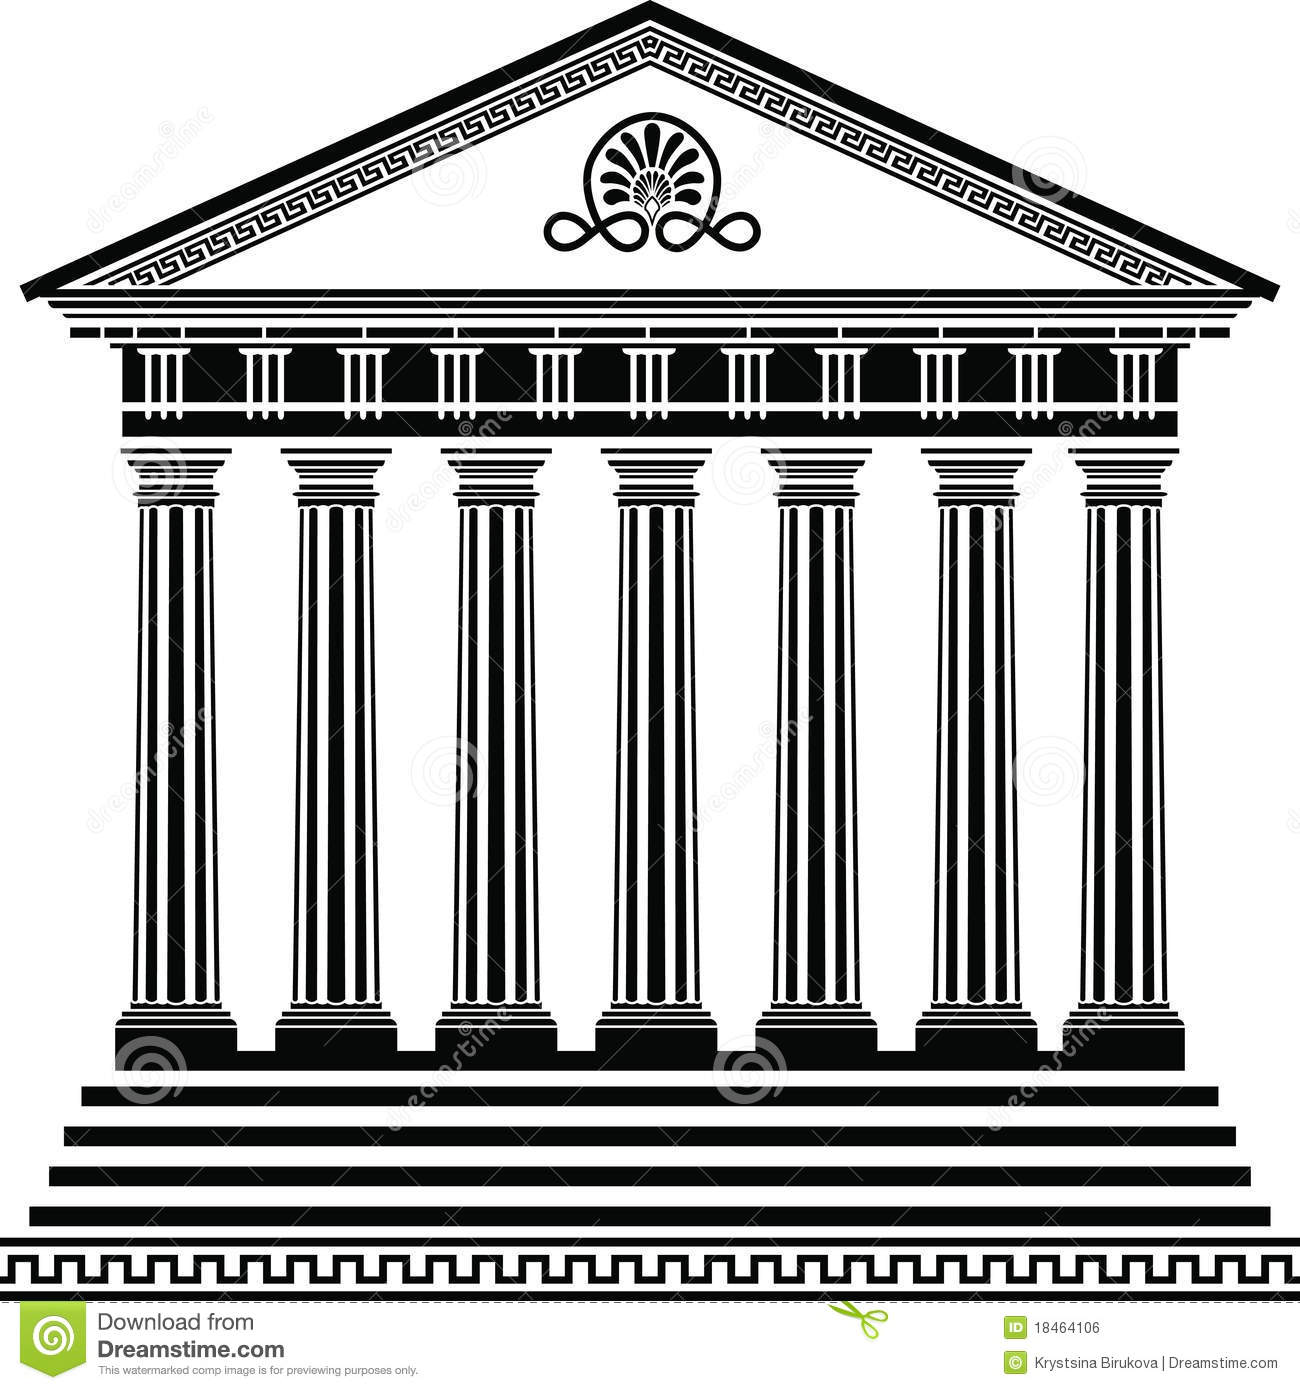 Greek Temple Stencil Second Variant Royalty Free Stock Image   Image